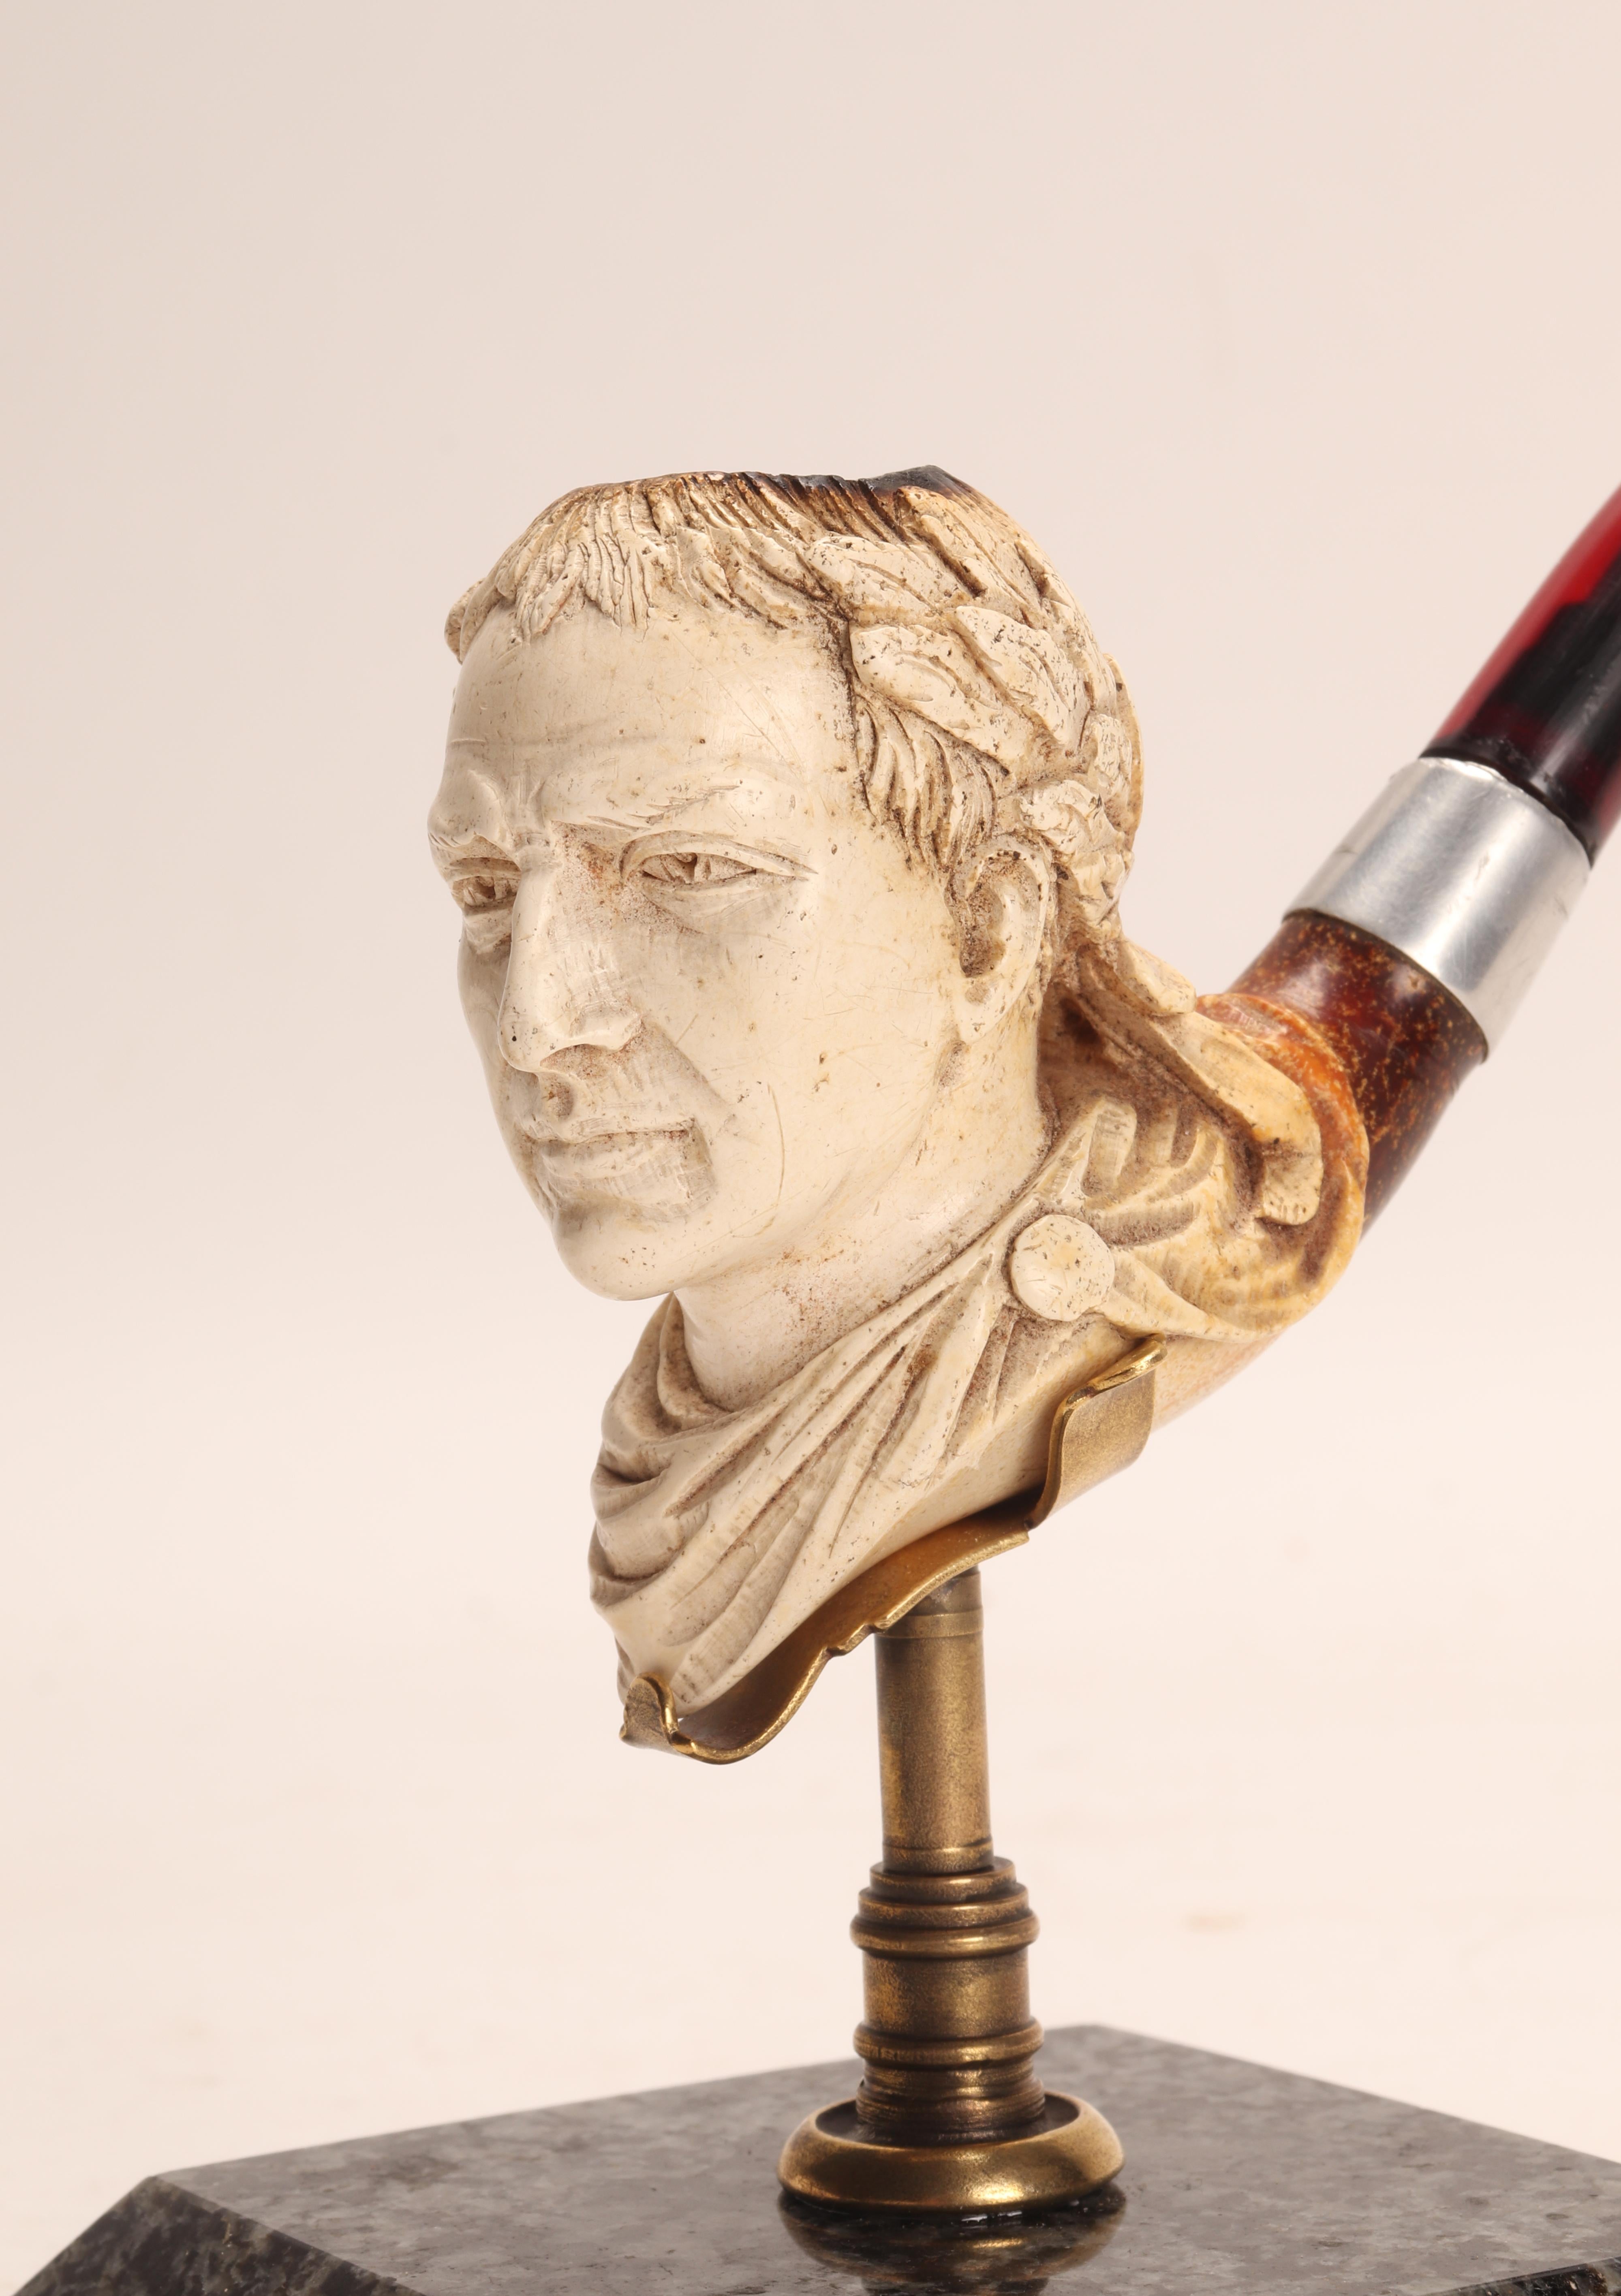 Carved meershaum pipe, with amber mouthpiece and silver band. In the bowl of the pipe, the head of the dictator Julius Caesar, is depicted with a laurel wreath on his head. Original case. Vienna, Austria circa 1880. (The stand is for photographic